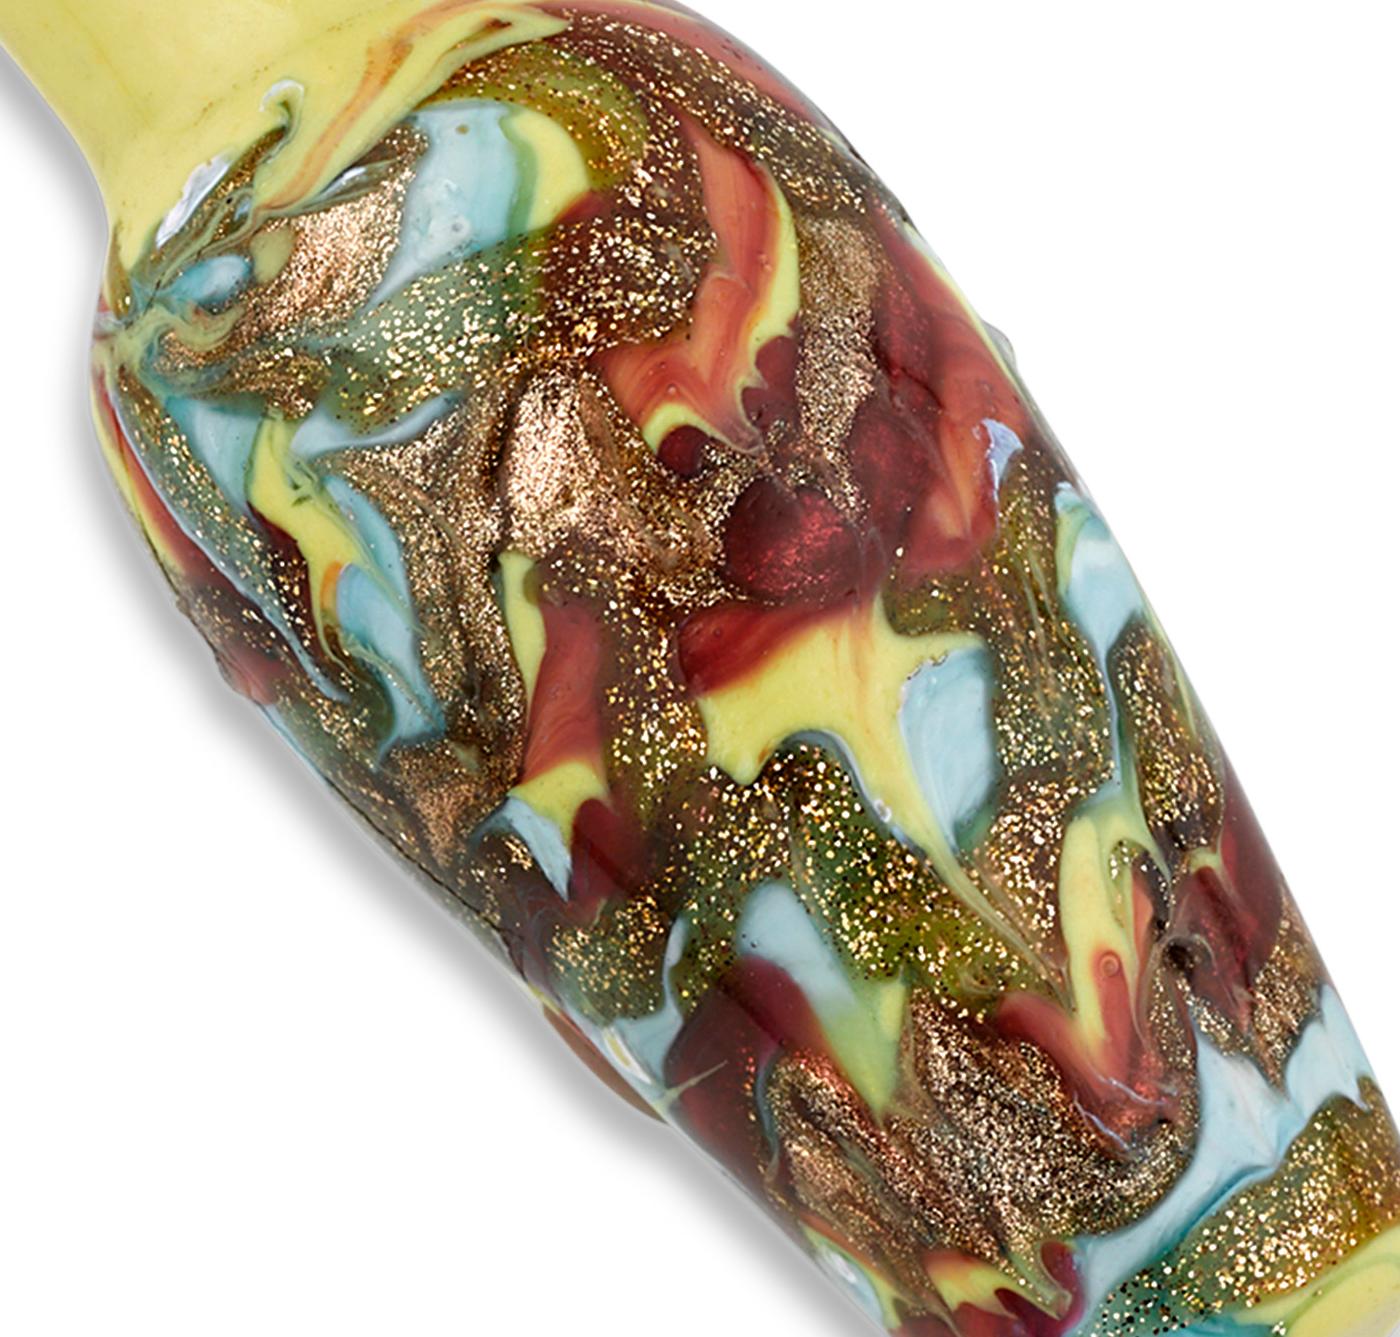 Crafted of Venetian glass, this exceptional perfume bottle displays an elaborate, marbled pattern of reds, yellows, blues and golds.

Late 19th century

Measures: 3/4